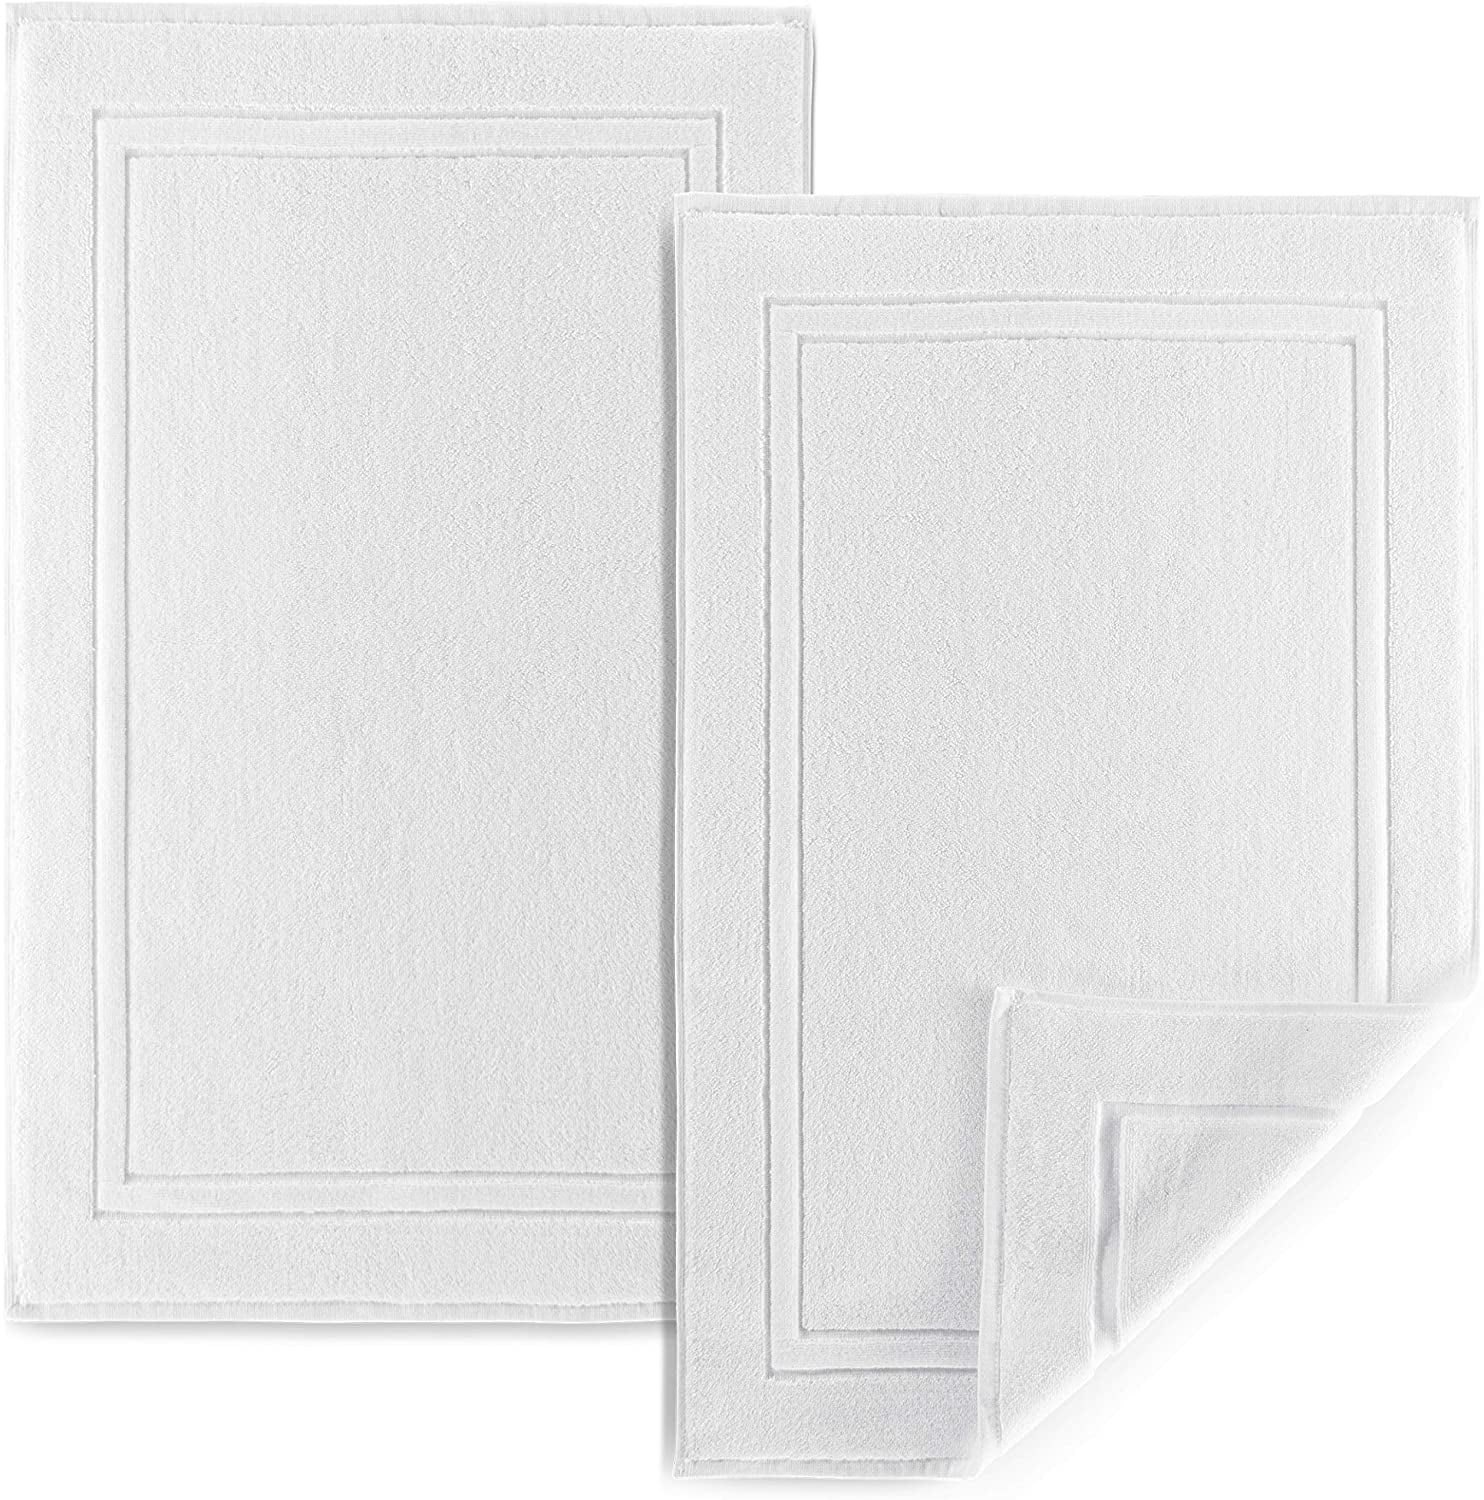 Pack of 2 Hotel and Spa, - Not a Bathroom Rug Highly Absorbent and Machine Washable Shower Bathroom Floor Mat Avalon Towels Cotton Bath Mat Set White 22x34 Inches,900 GSM,100% Ring Spun Cotton